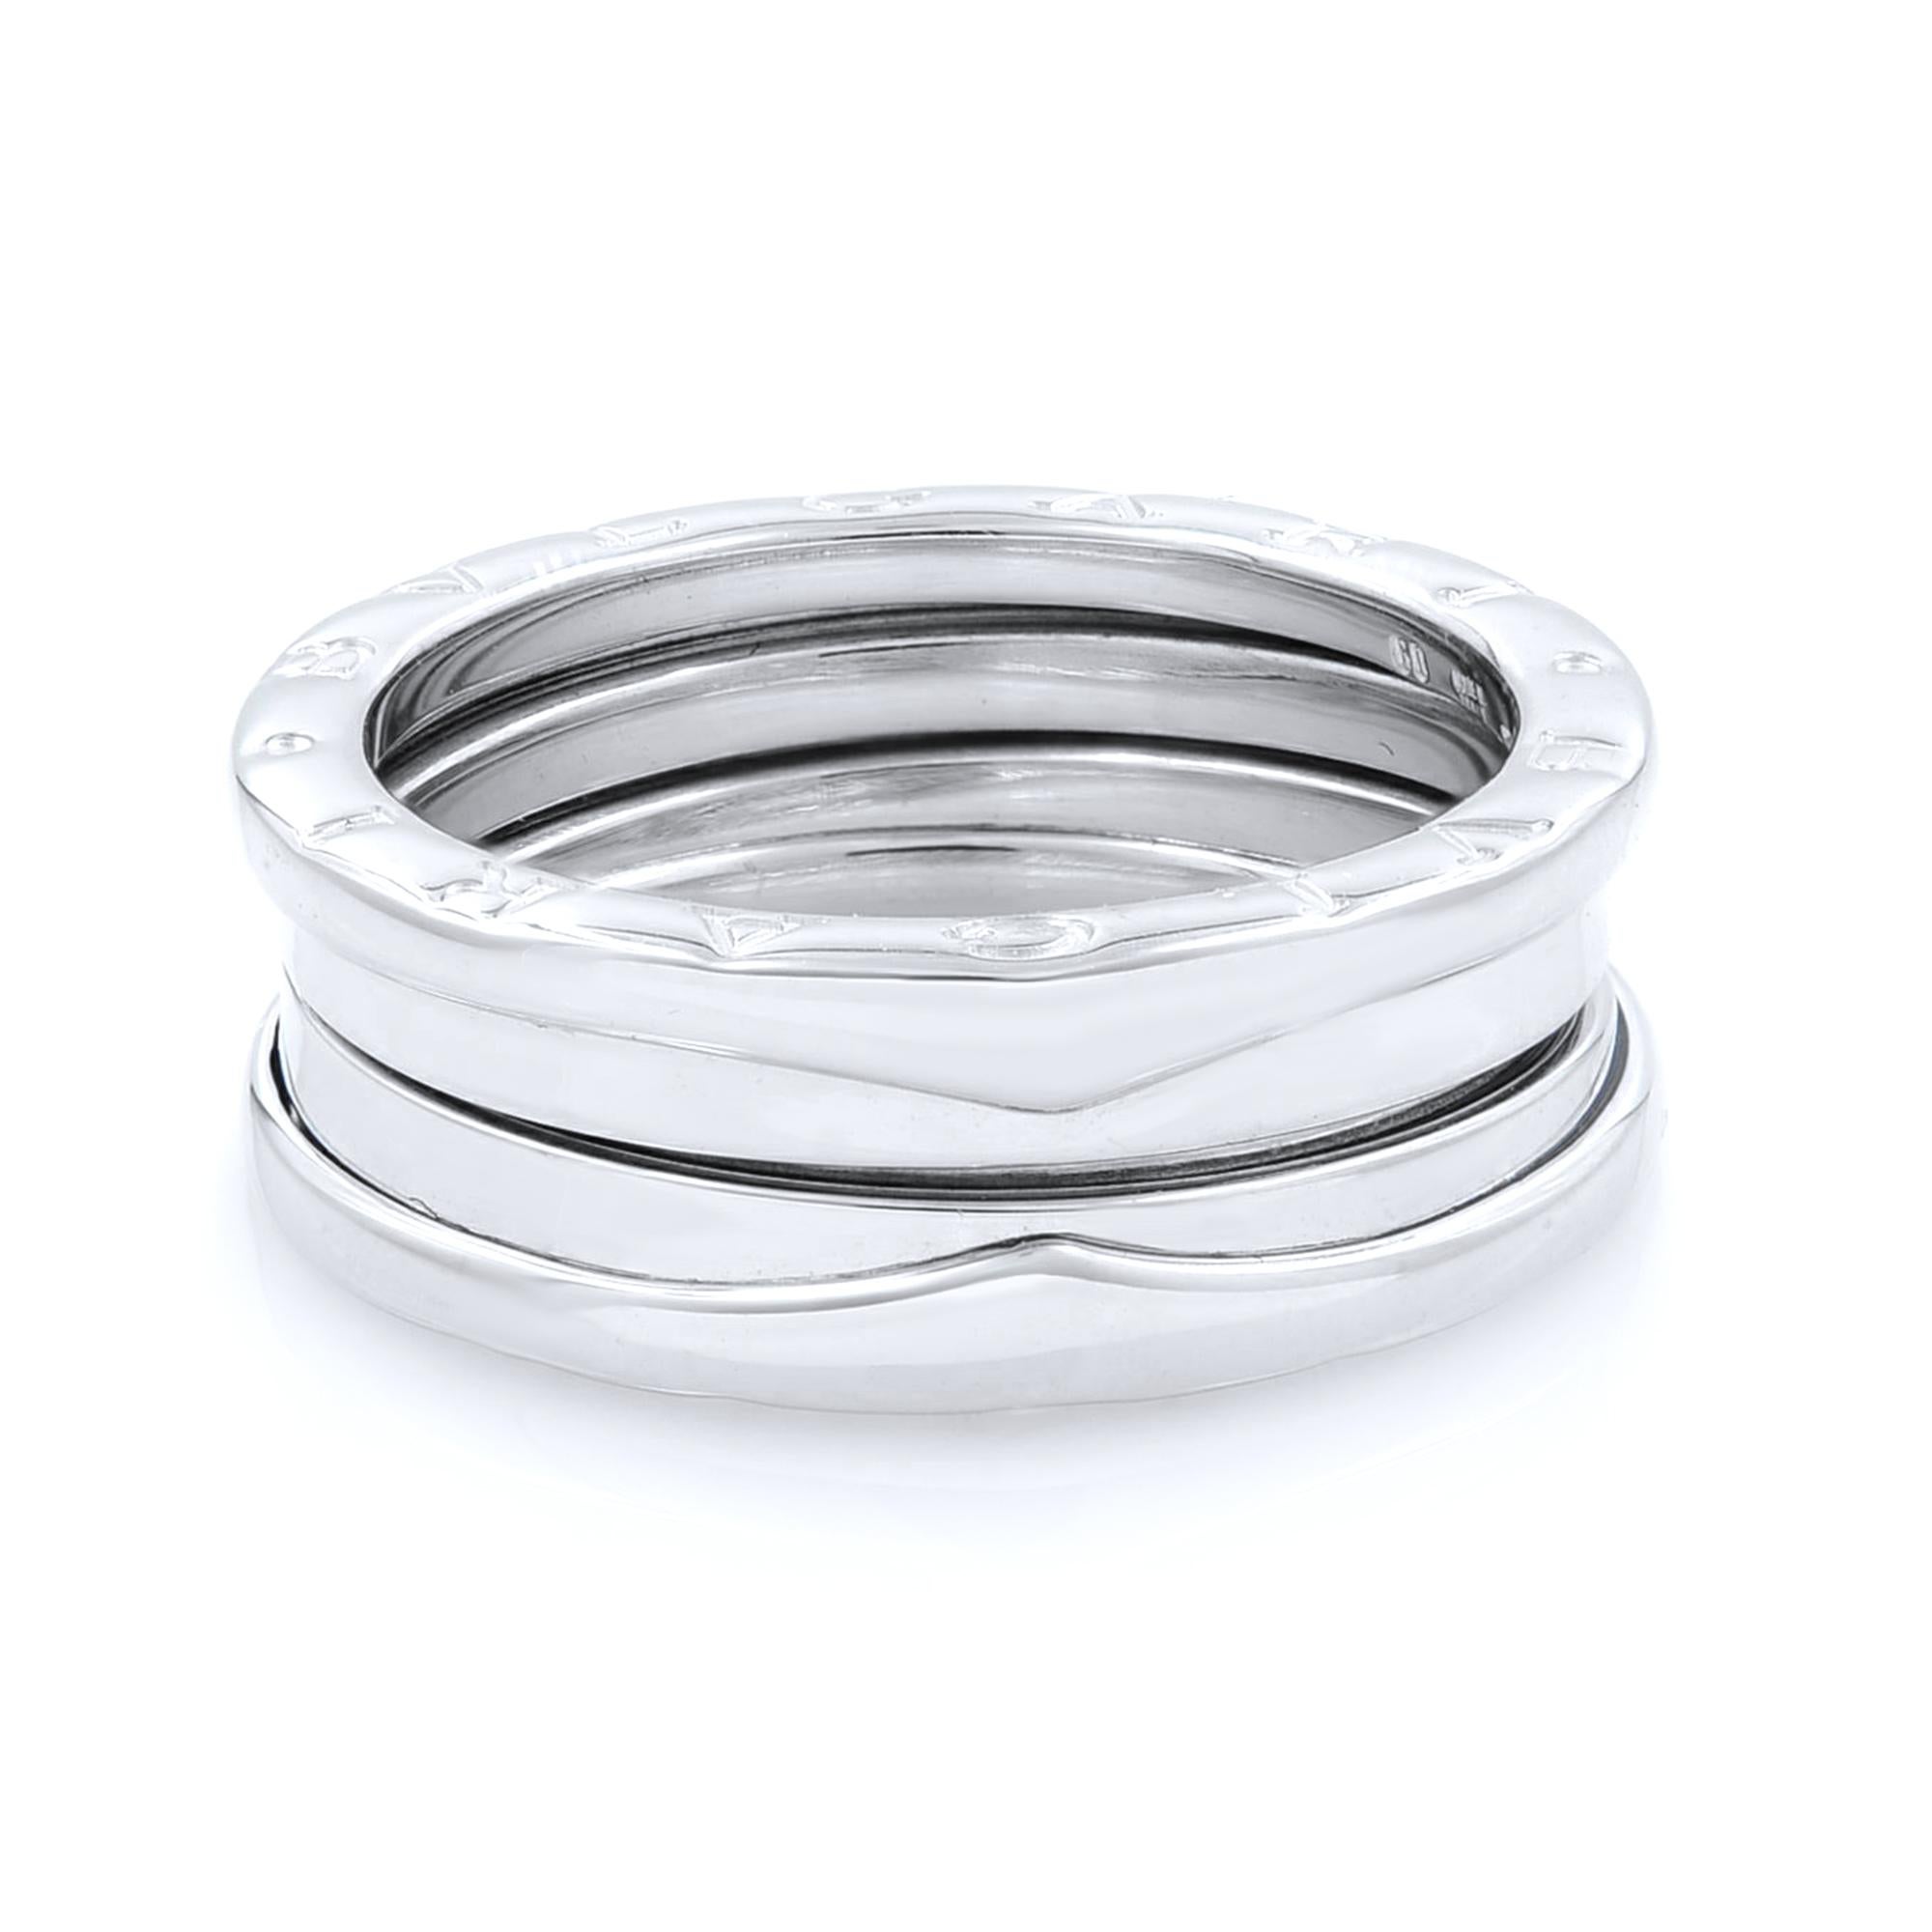 Bvlgari B.Zero 1 18K White Gold Ring SZ9
The B.Zero ring is a signature piece from the legendary jewelry design house Bvlgari. It features a clean, modern design with a white gold central band surrounded by two white gold rims with the BVLGARI logo